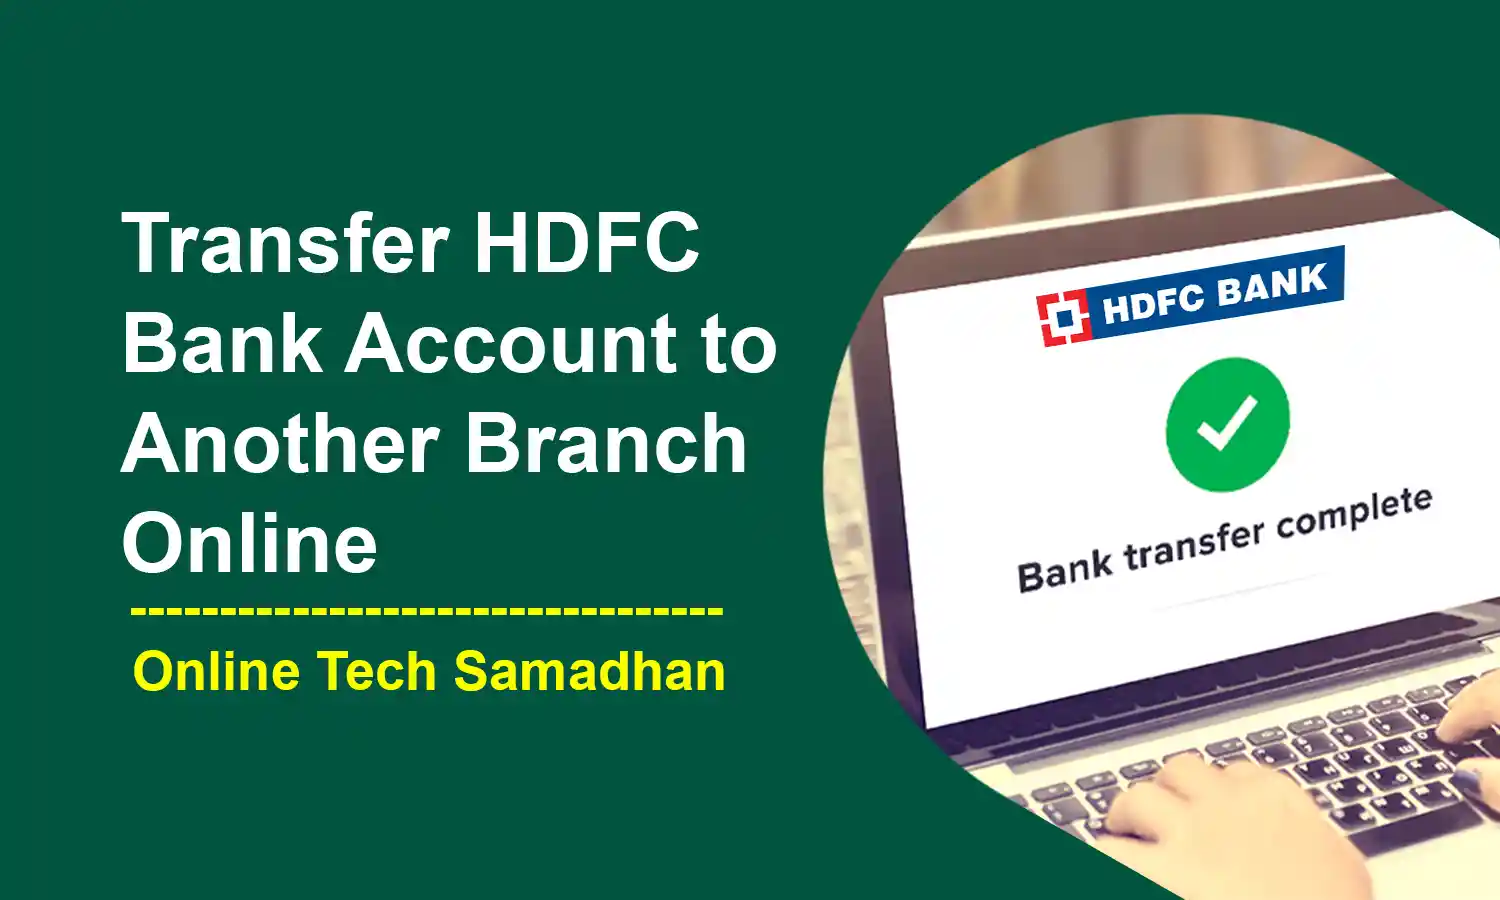 How to Transfer HDFC Bank Account to Another Branch Online